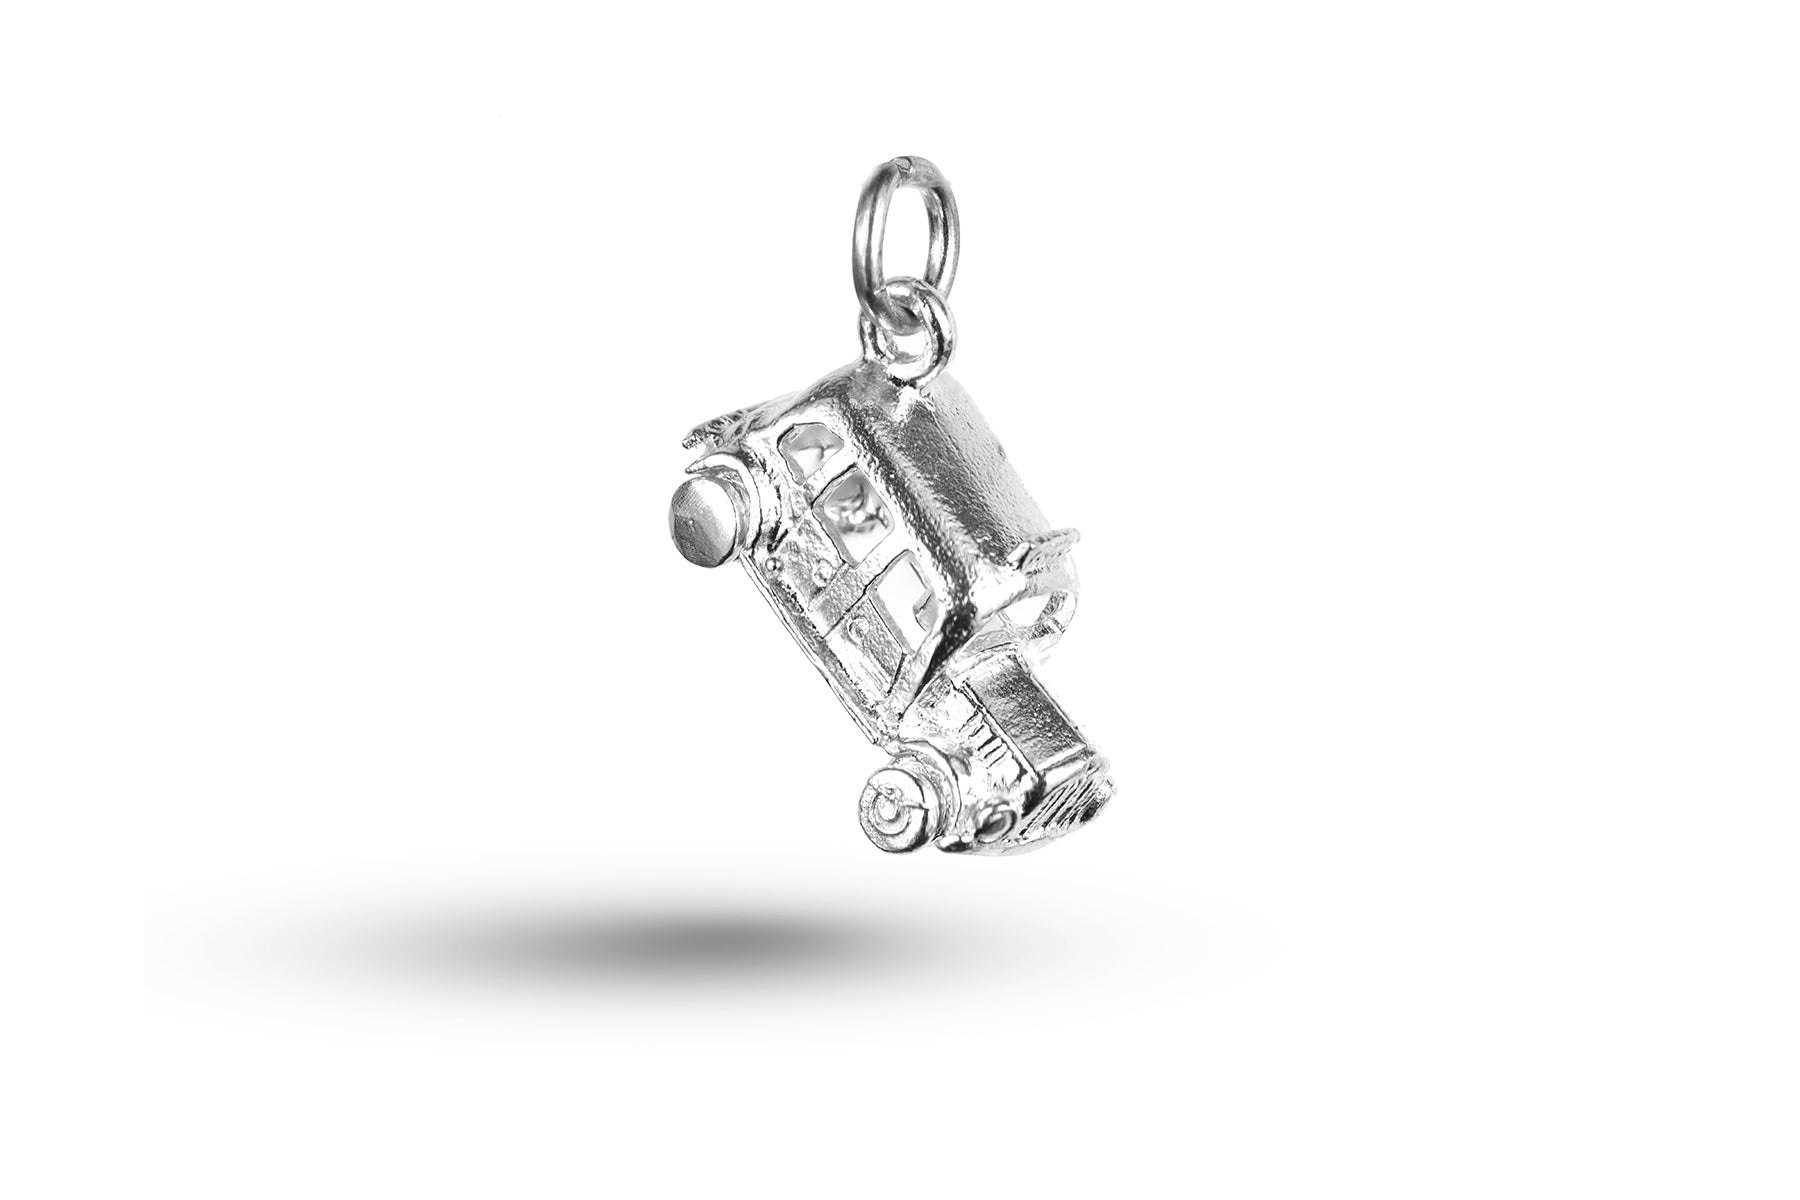 White gold London Taxi Cab charm.